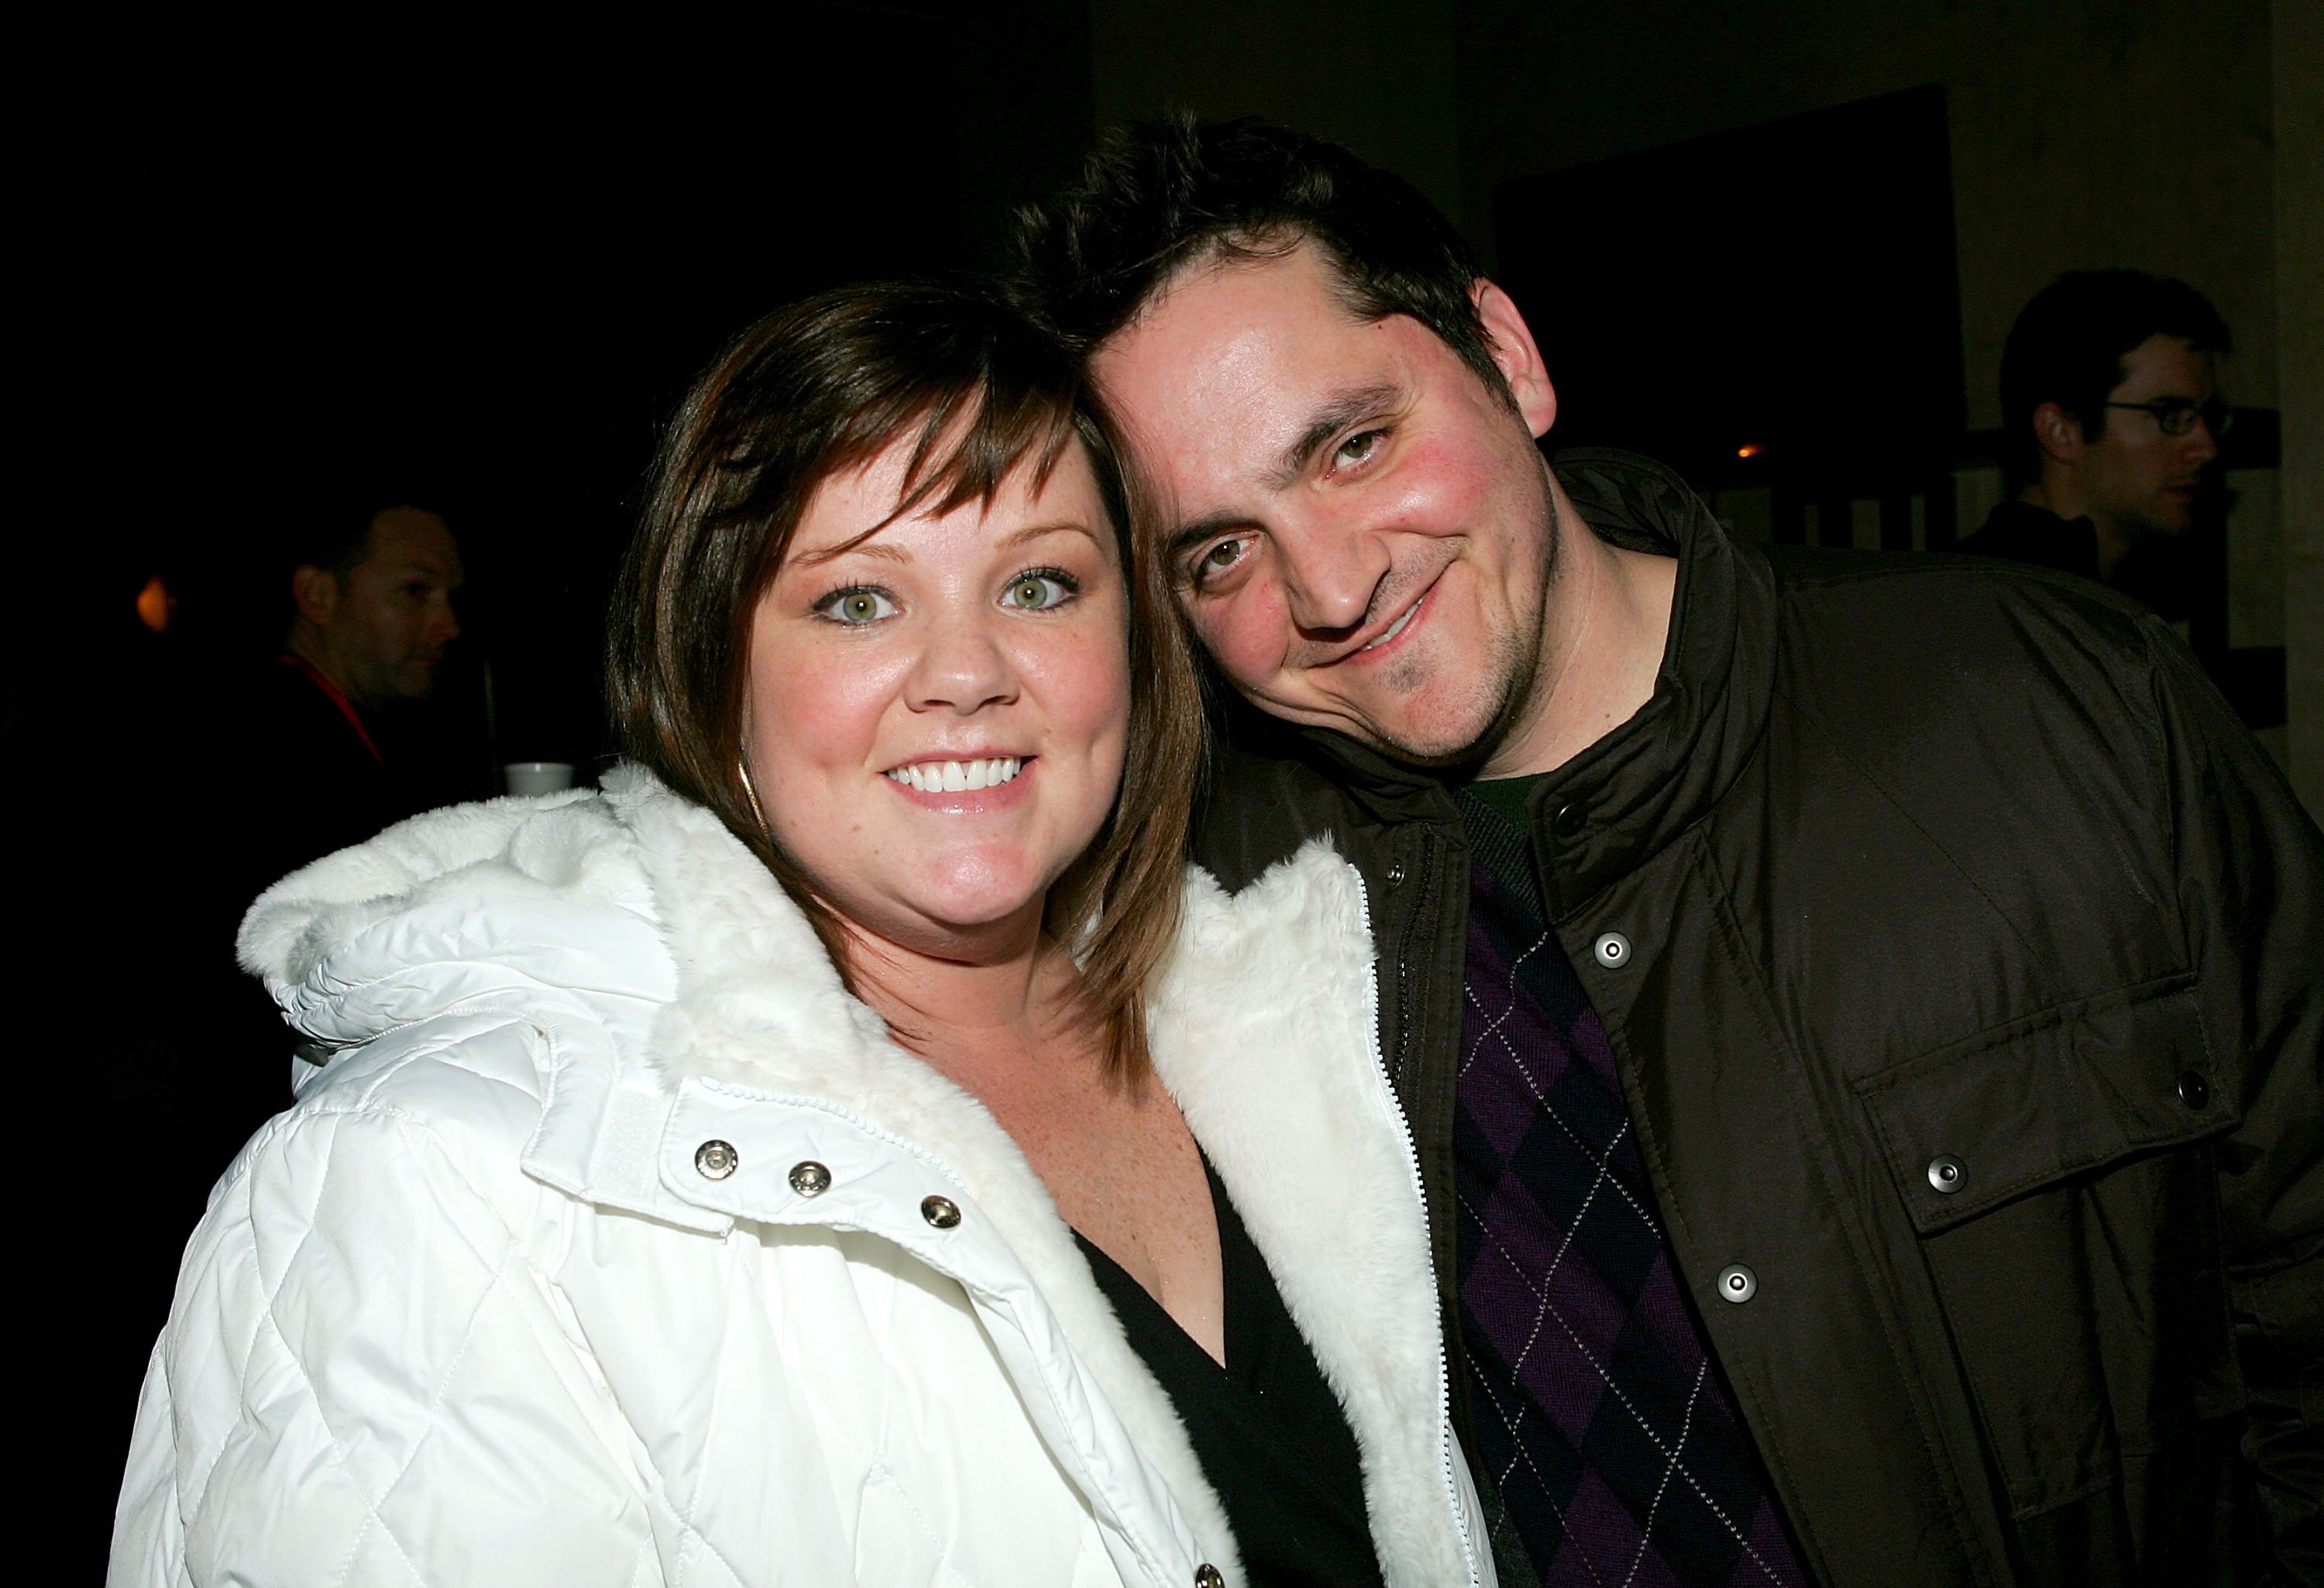 Melissa McCarthy and Ben Falcone at "The Nines" premiere during the Sundance Film Festival on January 21, 2007, in Park City, Utah. | Source: Getty Images